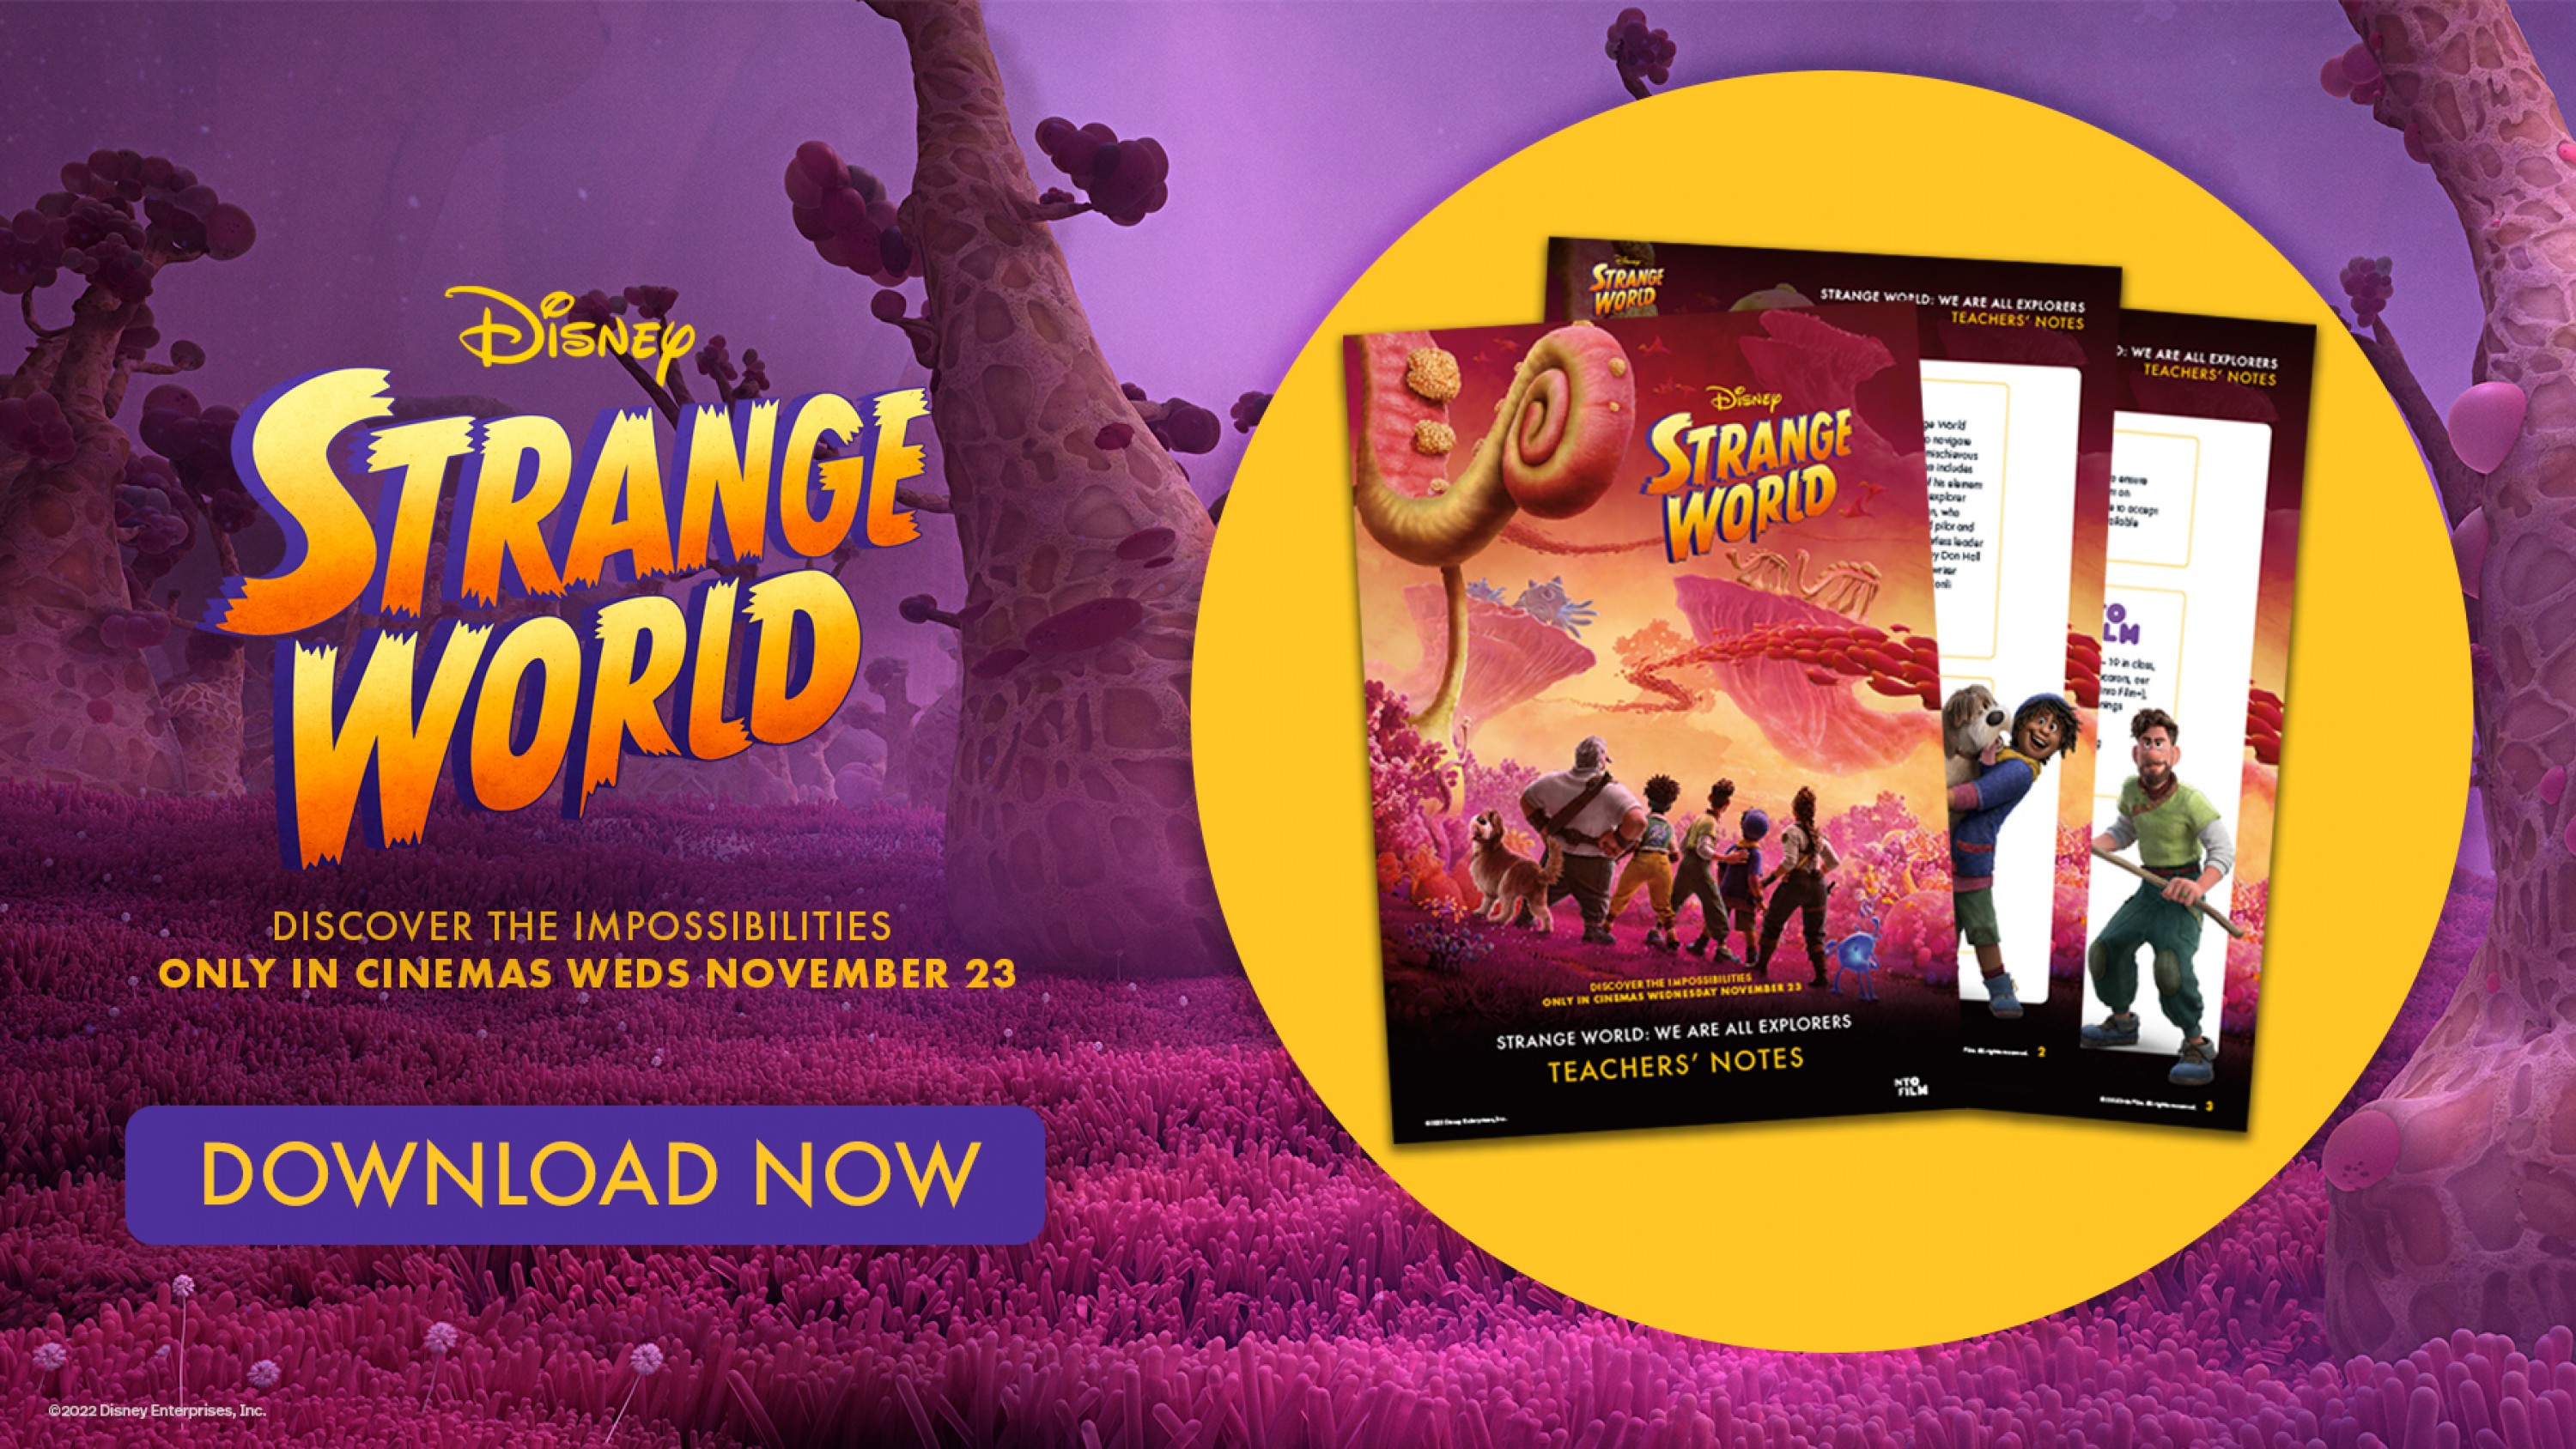 Our new resource inspired by Disney's Strange World is suitable for student